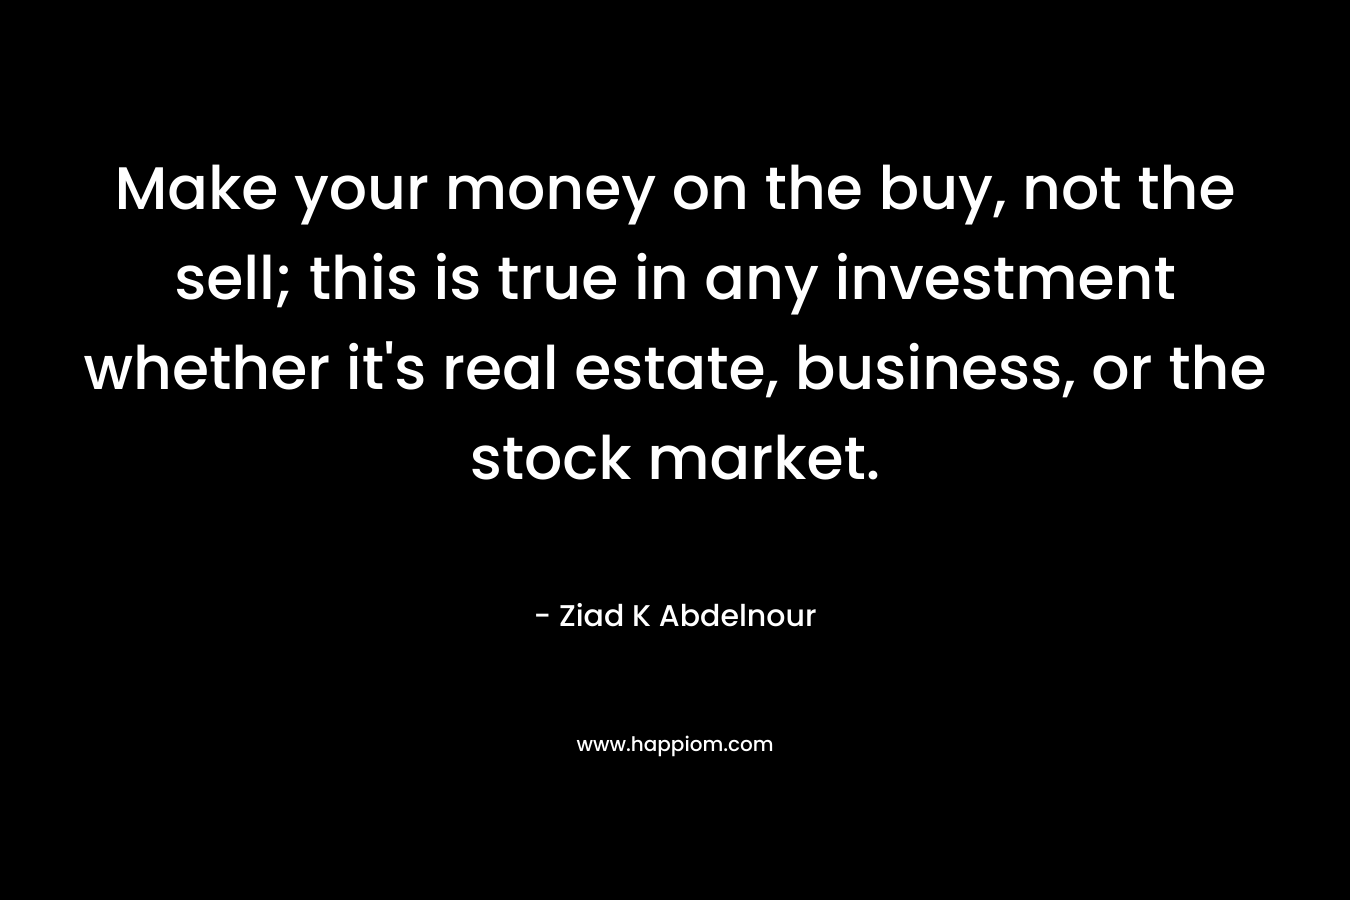 Make your money on the buy, not the sell; this is true in any investment whether it’s real estate, business, or the stock market. – Ziad K Abdelnour